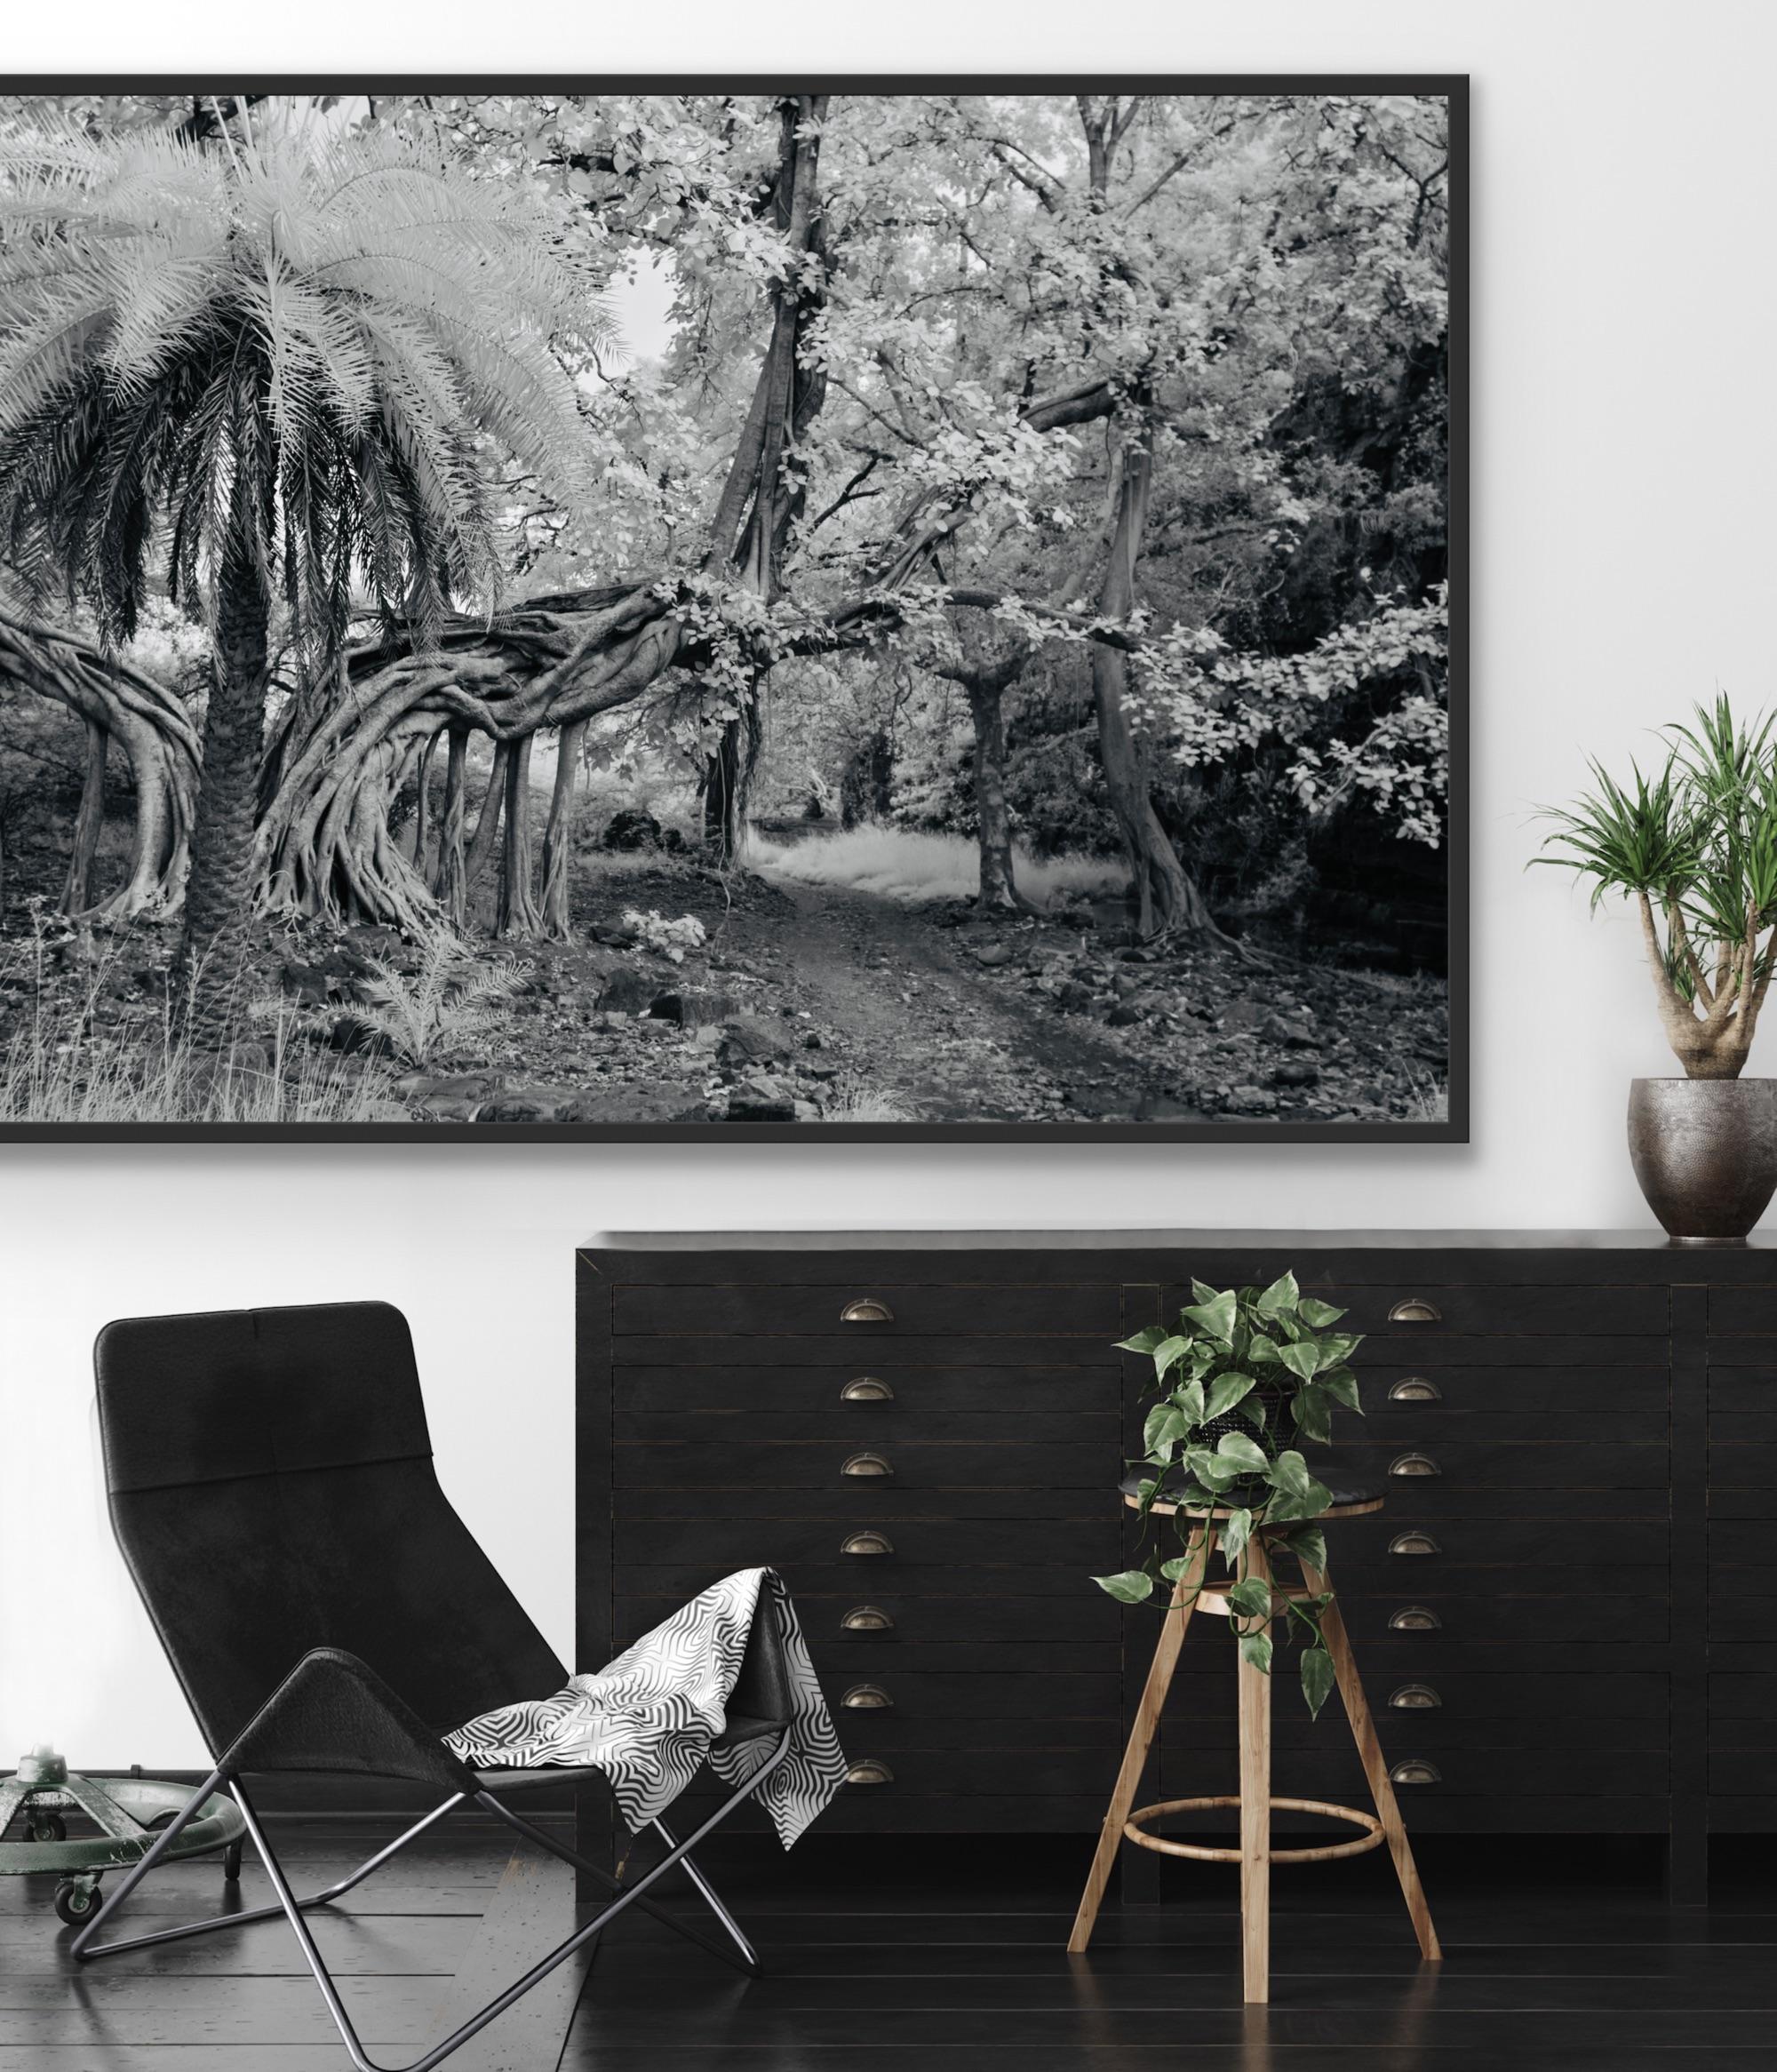 Landscape Photography Jungle Forest Black White Palm Tree India Wildlife Banyan  For Sale 5